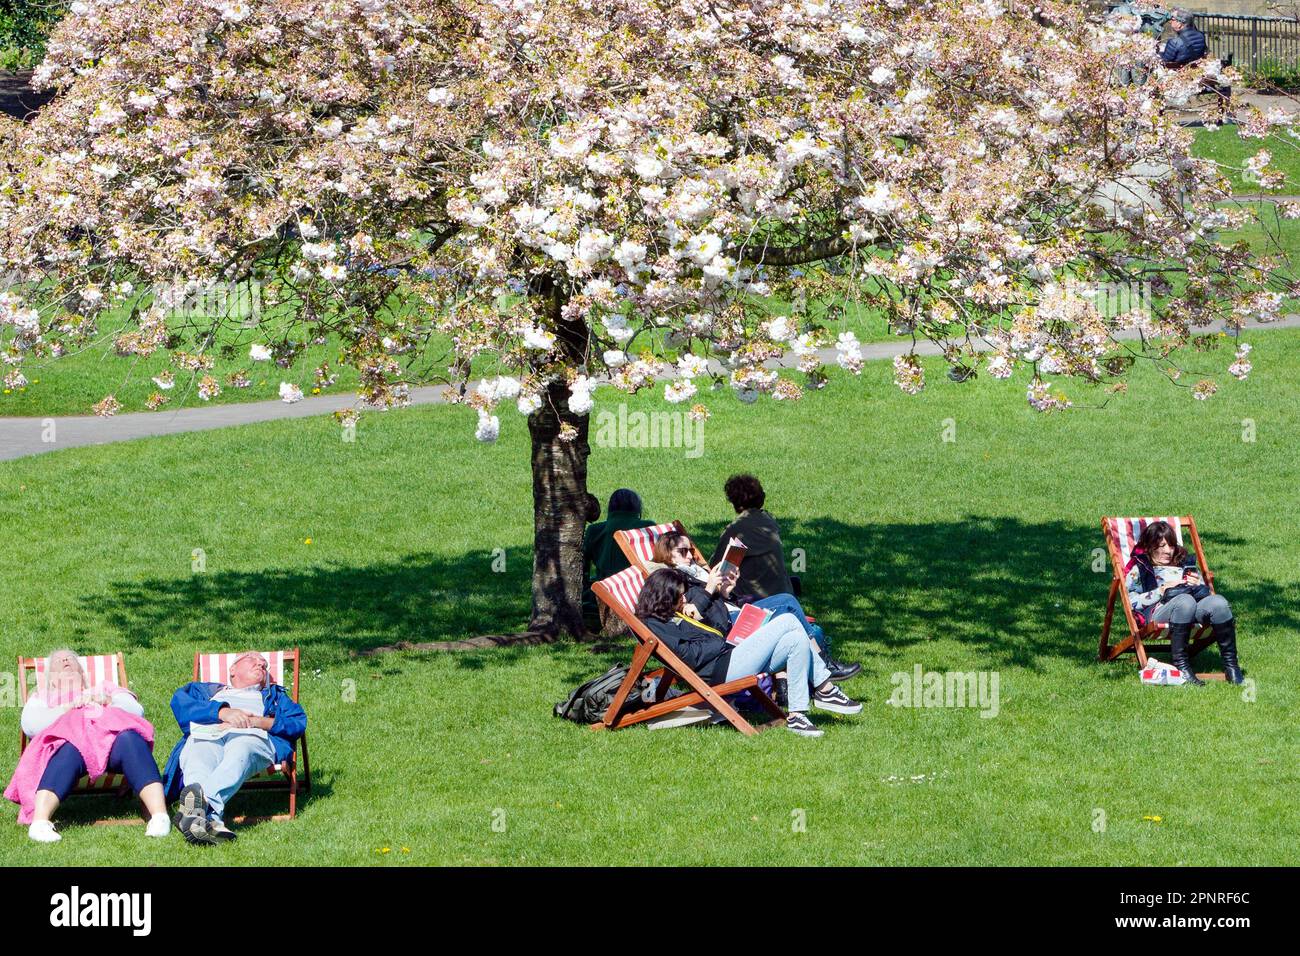 Bath, UK. 20th April, 2023. With forecasters predicting that cooler and more overcast weather is to come in the next few days, visitors to Bath's Parade Gardens are pictured taking advantage of the warm afternoon sunshine. Credit: Lynchpics/Alamy Live News Stock Photo